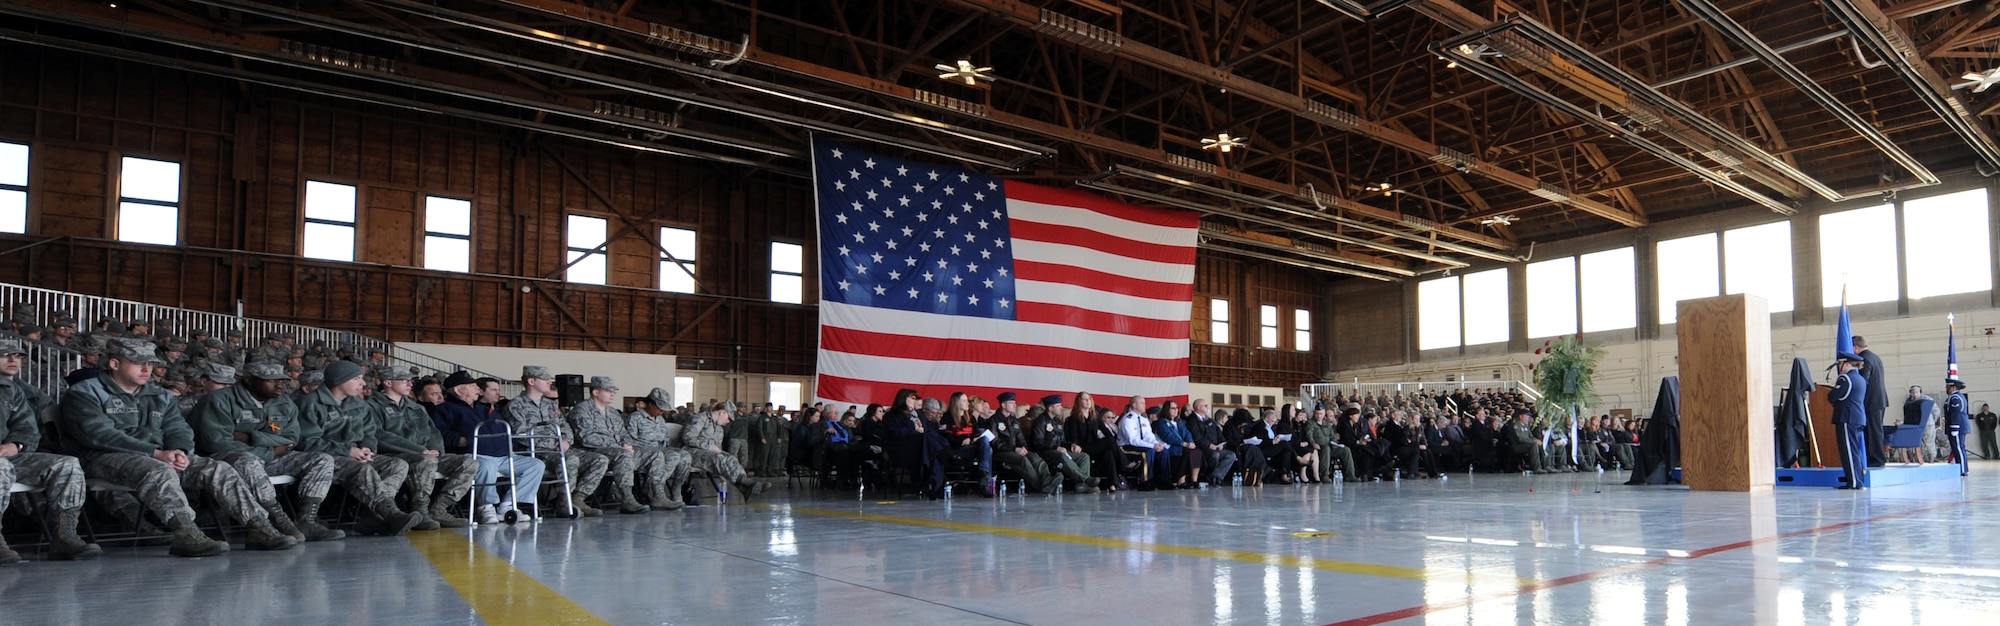 U.S. Air Force Airmen from the 366th Fighter Wing attend a memorial for Capt. Dee “Piston” Imlay at Mountain Home Air Force Base, Idaho, April 6, 2012. Imlay, an F-15E pilot who passed while serving in Southwest Asia, is a member of the 391st Fighter Squadron. (U.S. Air Force photo/Senior Airman Debbie Lockhart)